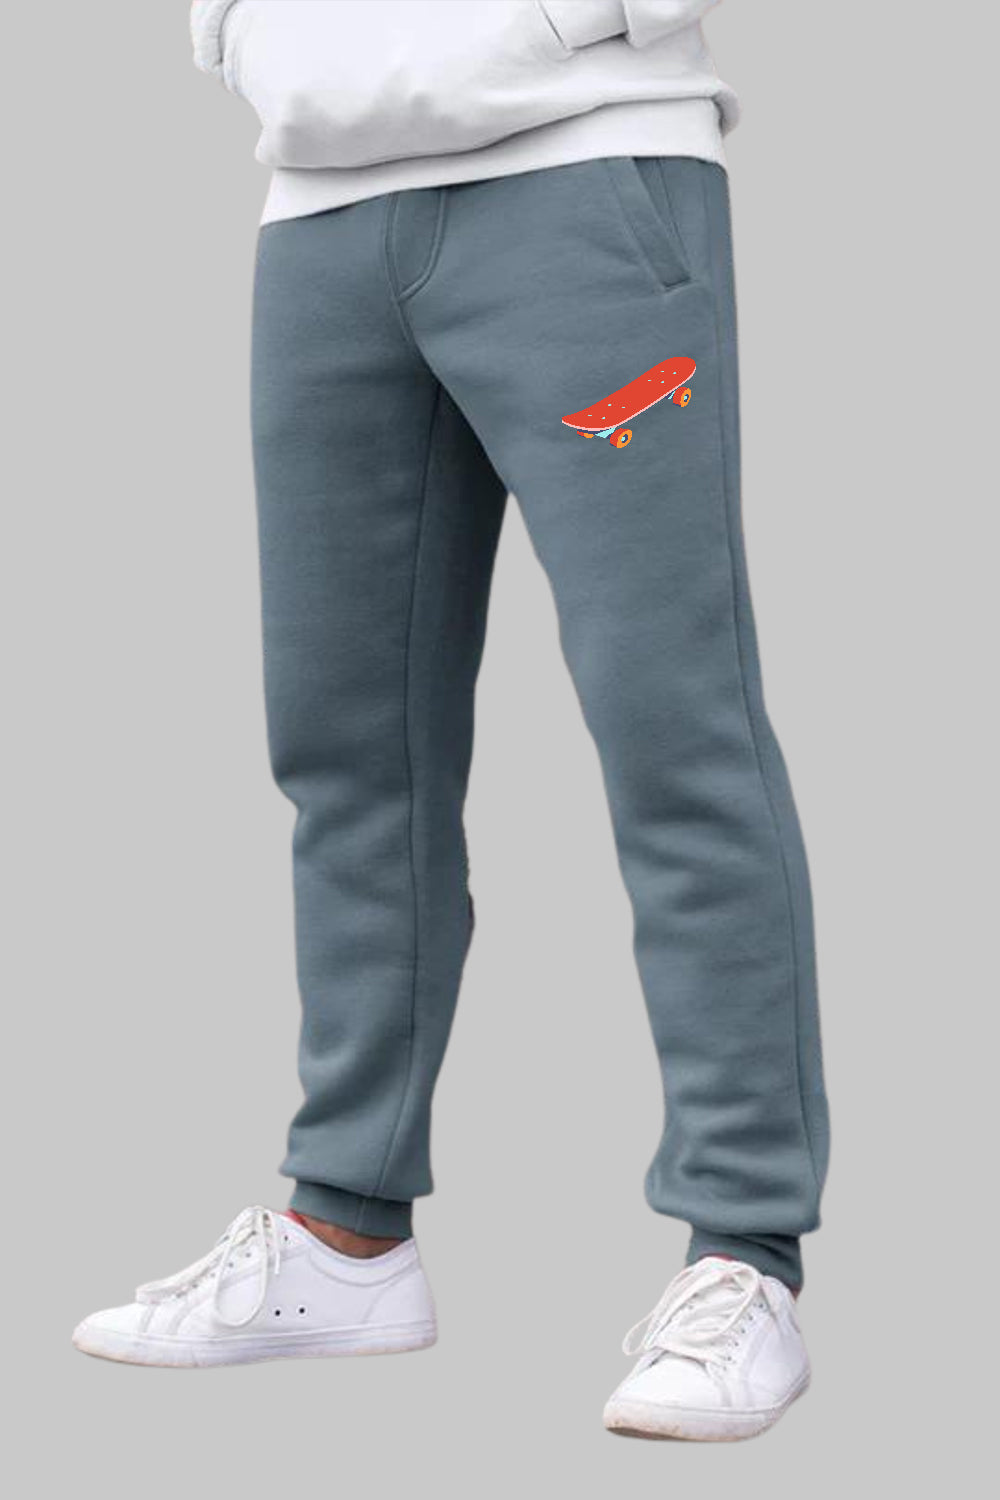 Skateboard Graphic Printed Blue Grey Joggers